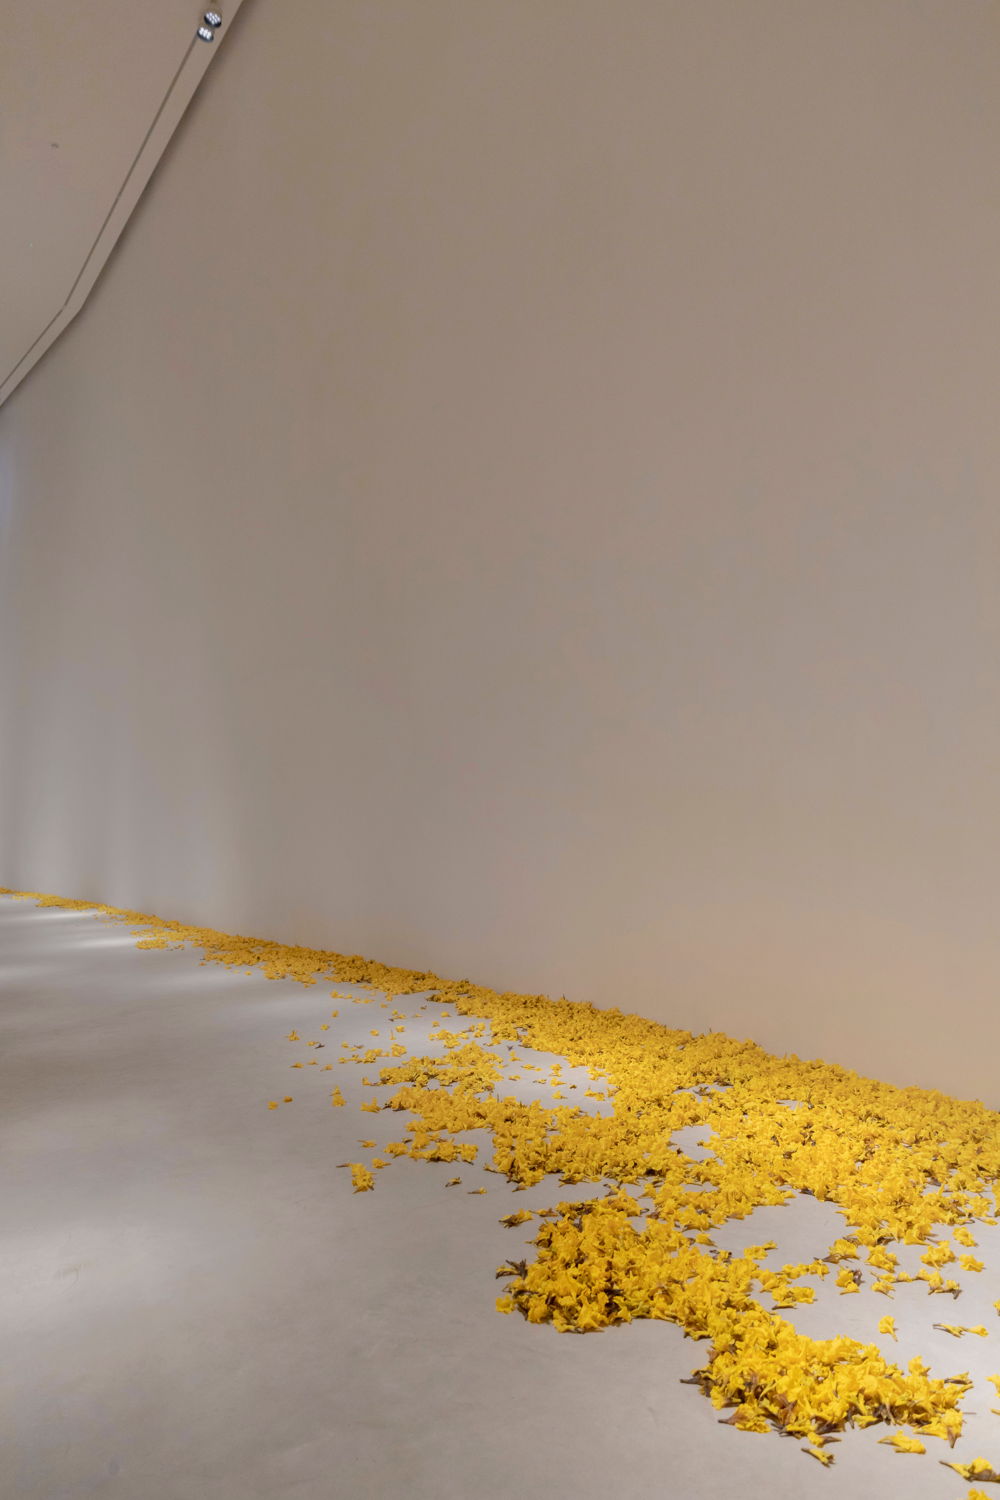 Allora & Calzadilla, Graft, 2019. Installation view at Z33 House for Contemporary Art, Design & Architecture, Hasselt, Belgium. Courtesy the artists and Gladstone Gallery, New York and Brussels. Photo: Selma Gurbuz.